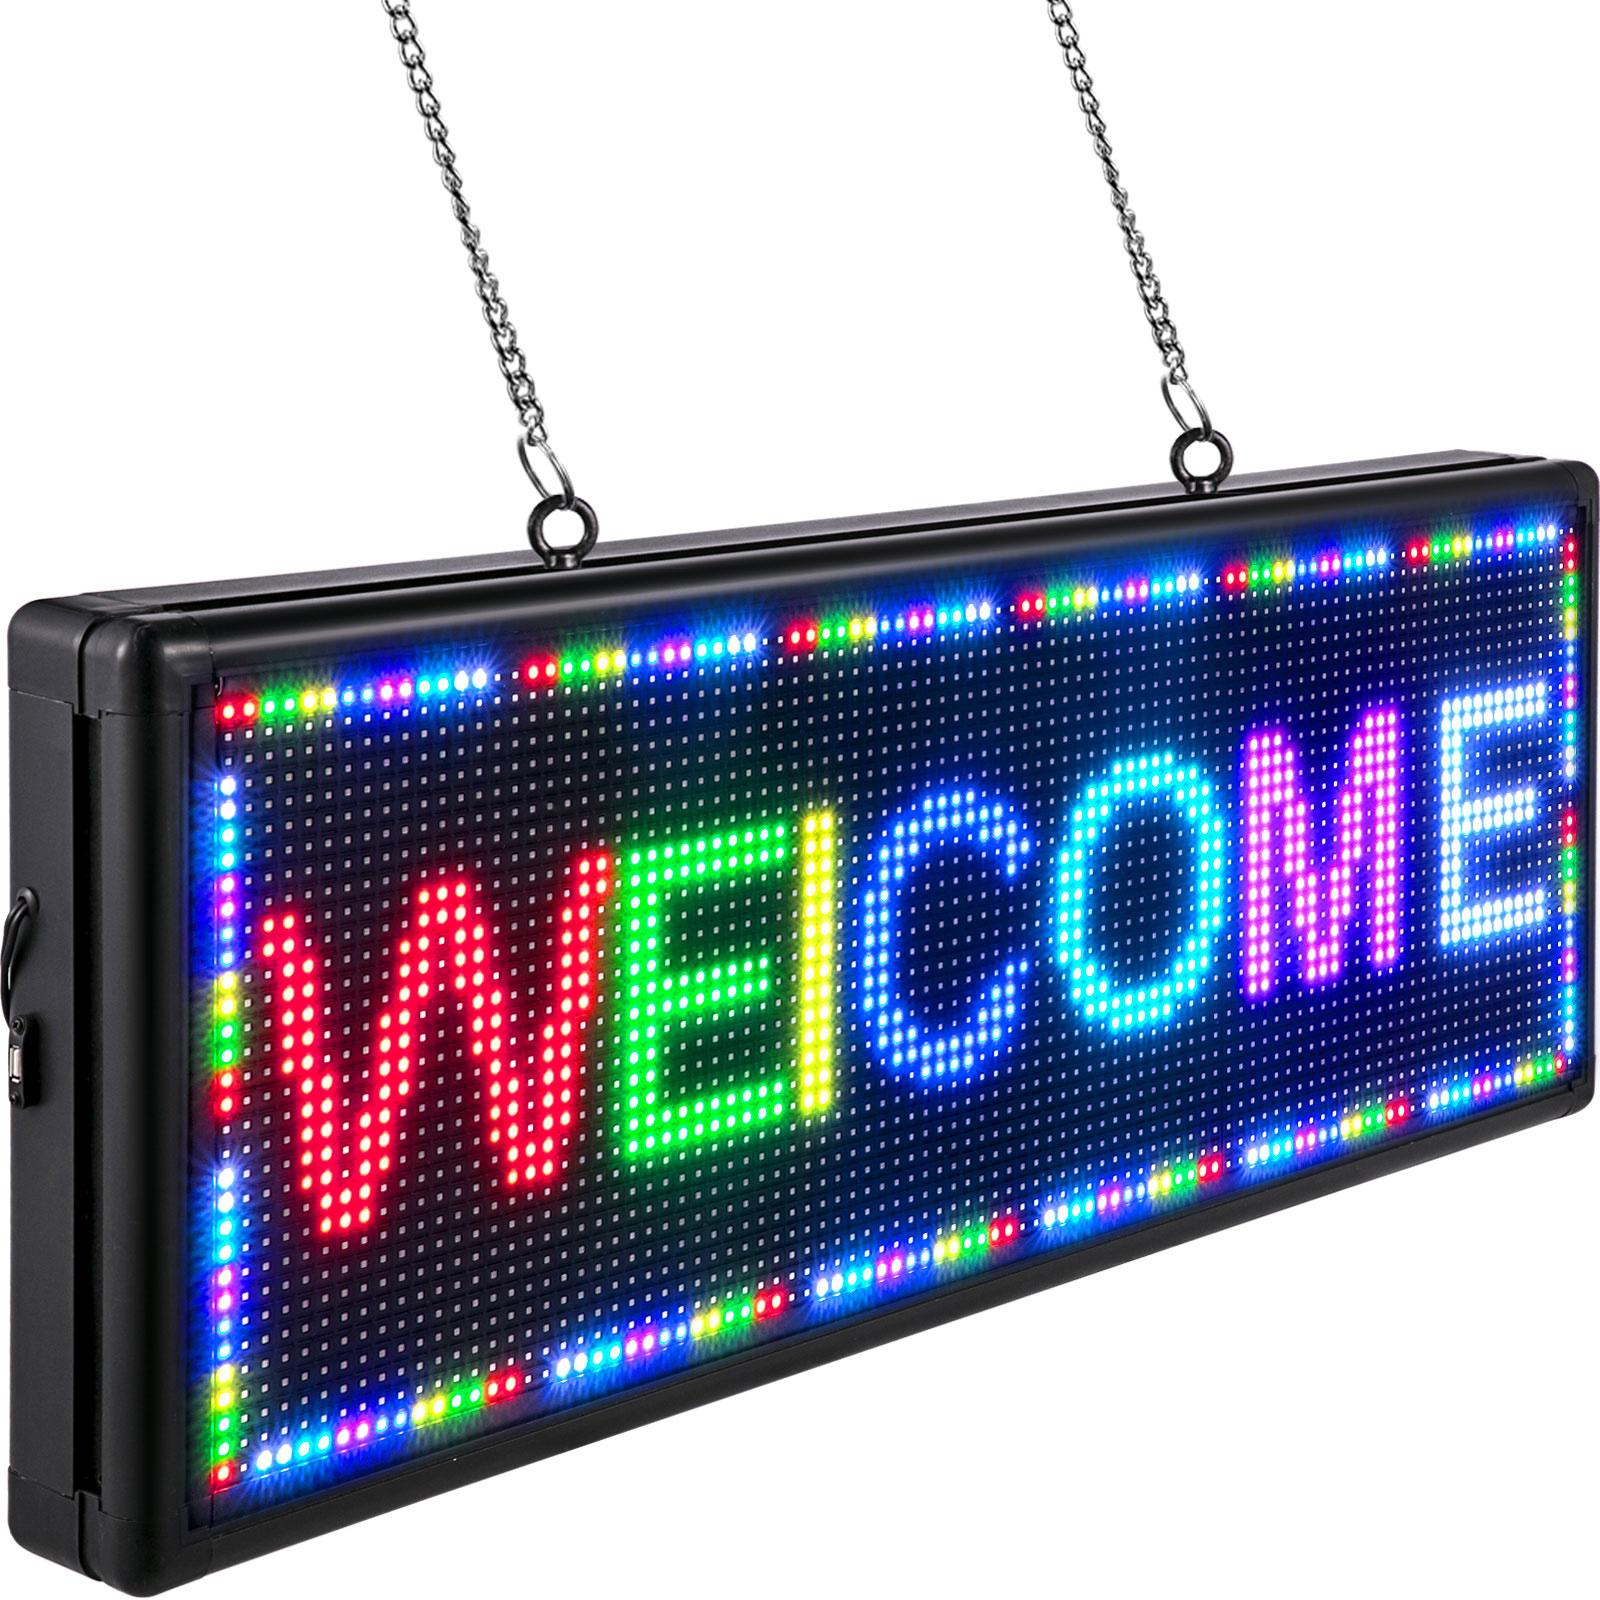 TriColor LED Programmable Scrolling Message Display Sign BRAND NEW FREE SHIPPING 